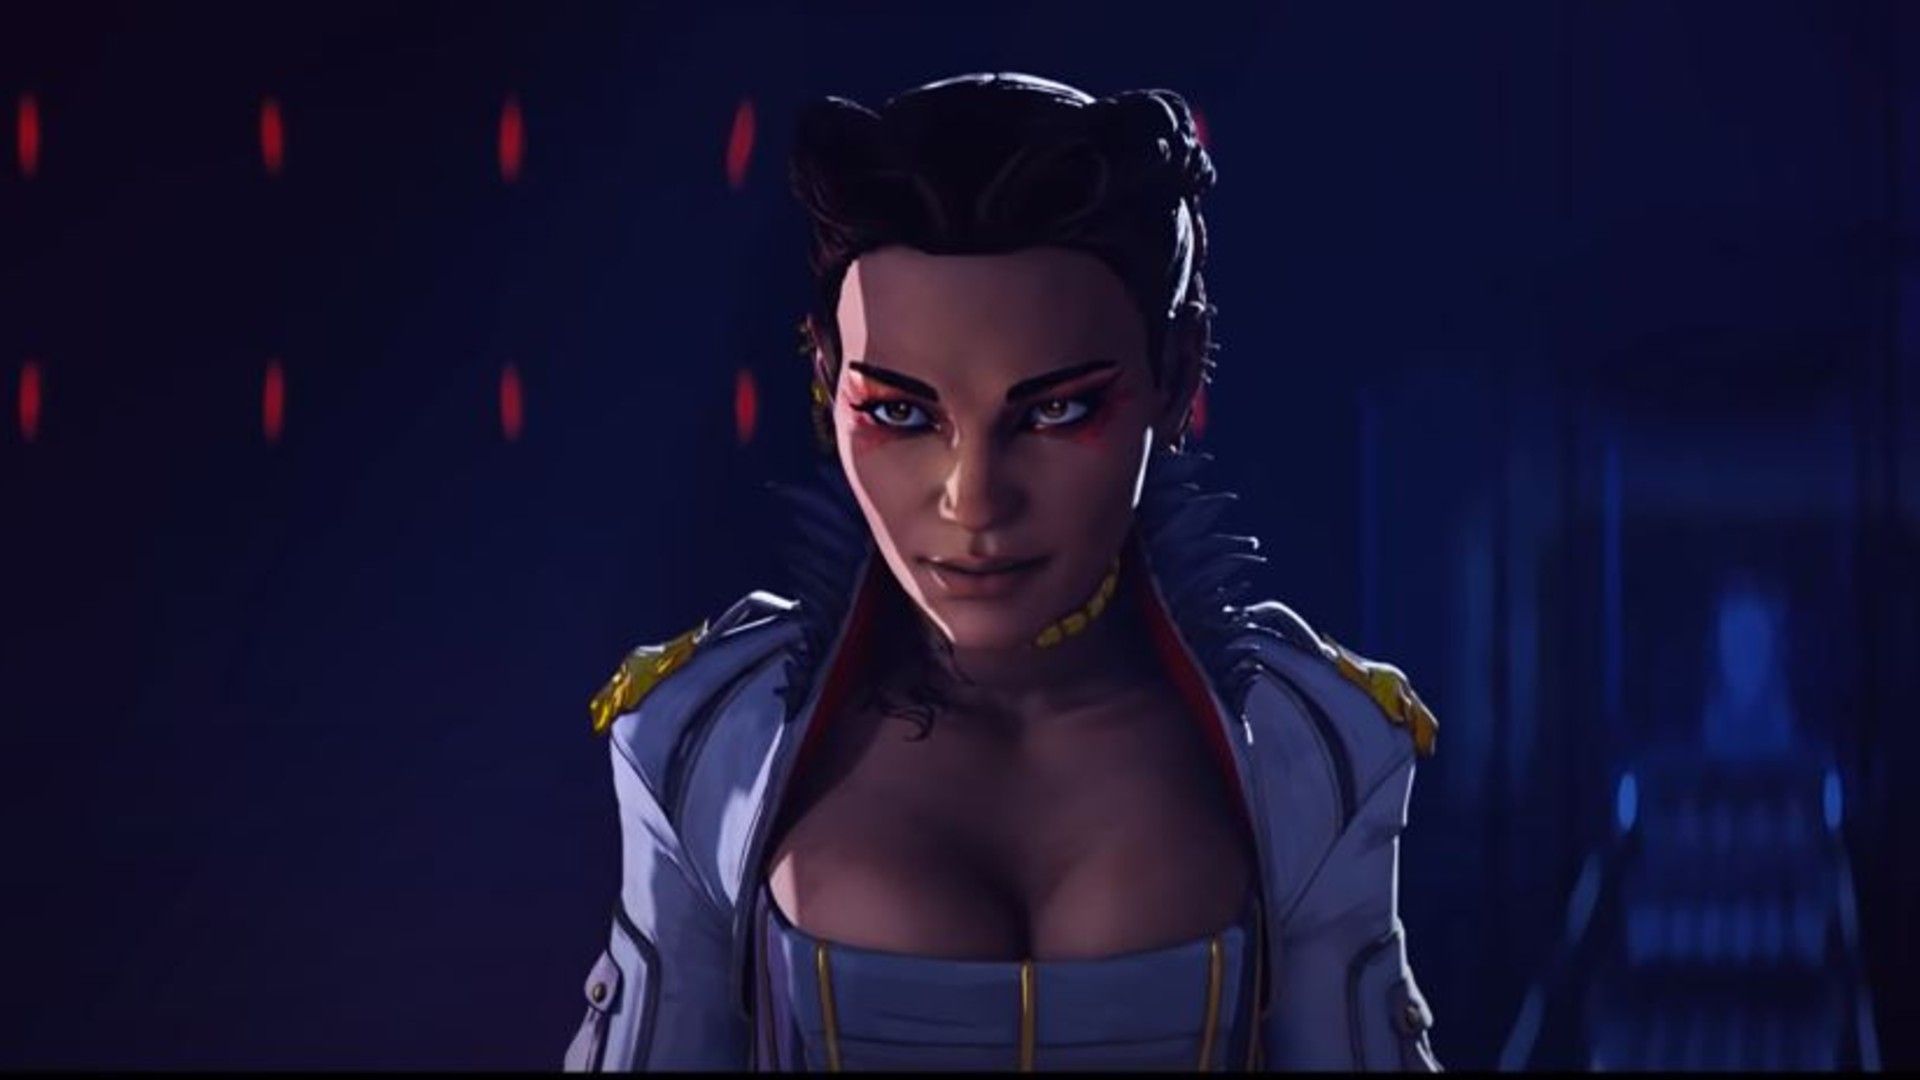 Featured image of post Apex Legends Loba Wallpaper Pc Zerochan has 9 loba apex legends anime images fanart and many more in its gallery